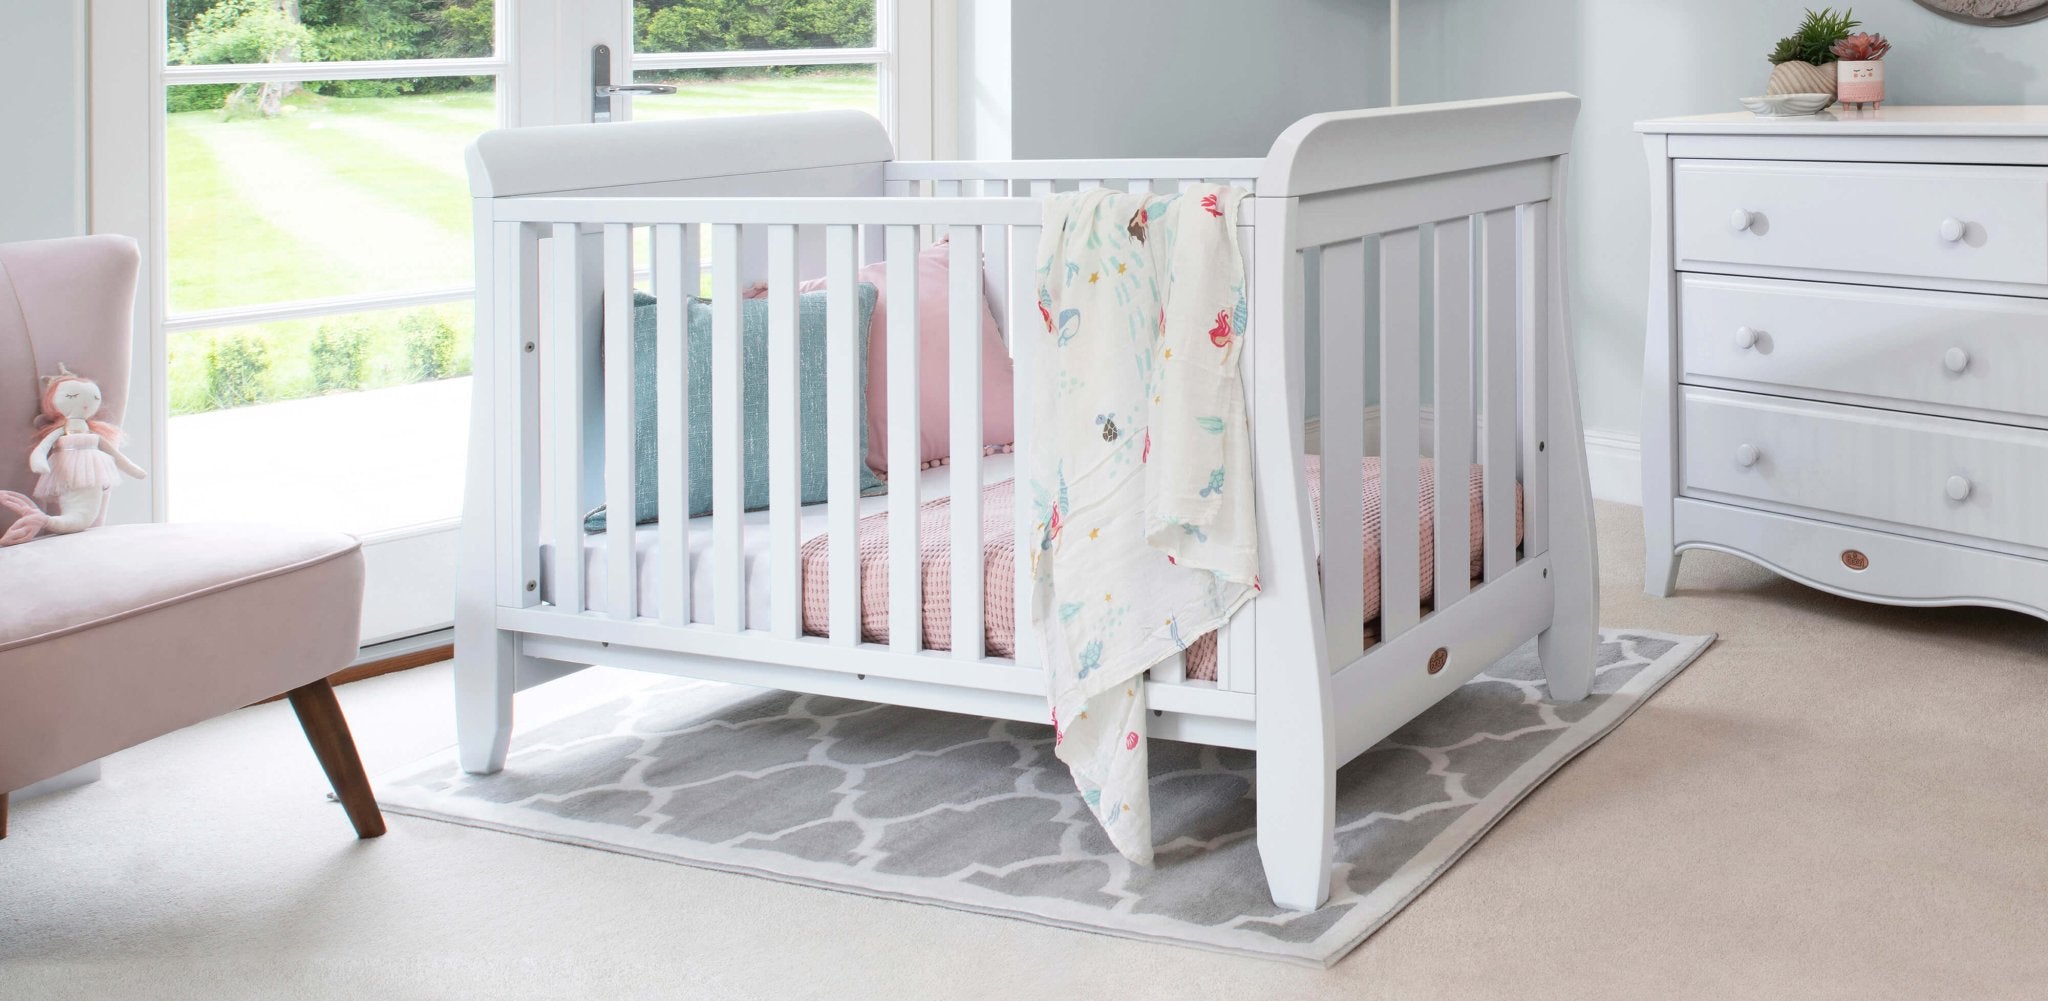 Sleigh cot bed in centre of bright nursery